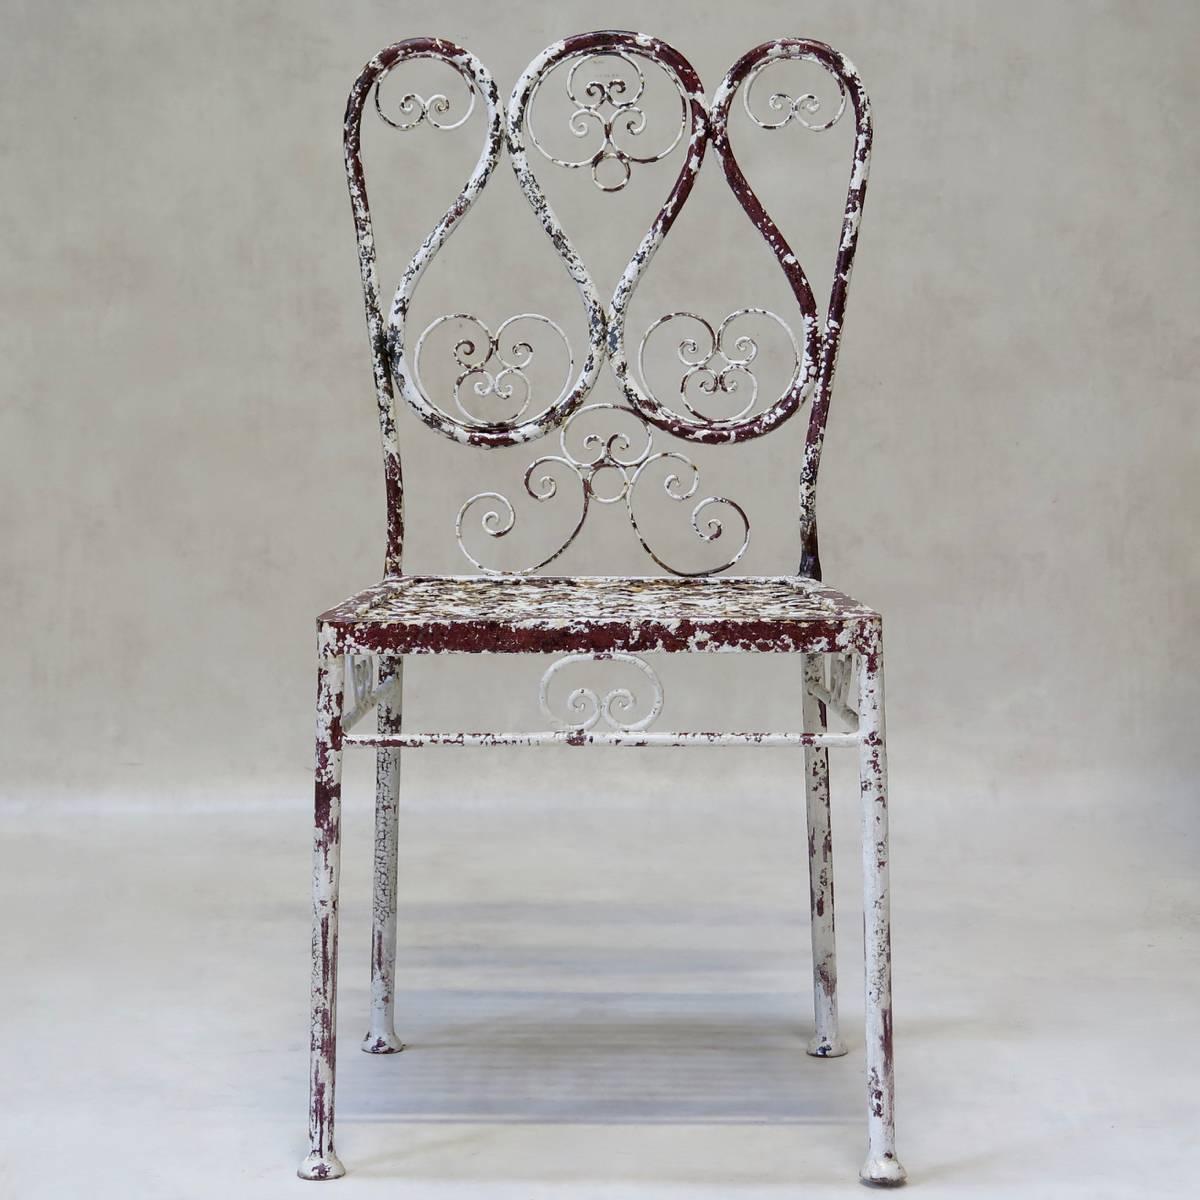 Charming set of four garden chairs with a tubular iron structure. The backs and back chair legs are fashioned from one-piece of iron, the backs adorned with curlicues. Lattice seats. Original paint: Distressed white with red visible beneath.